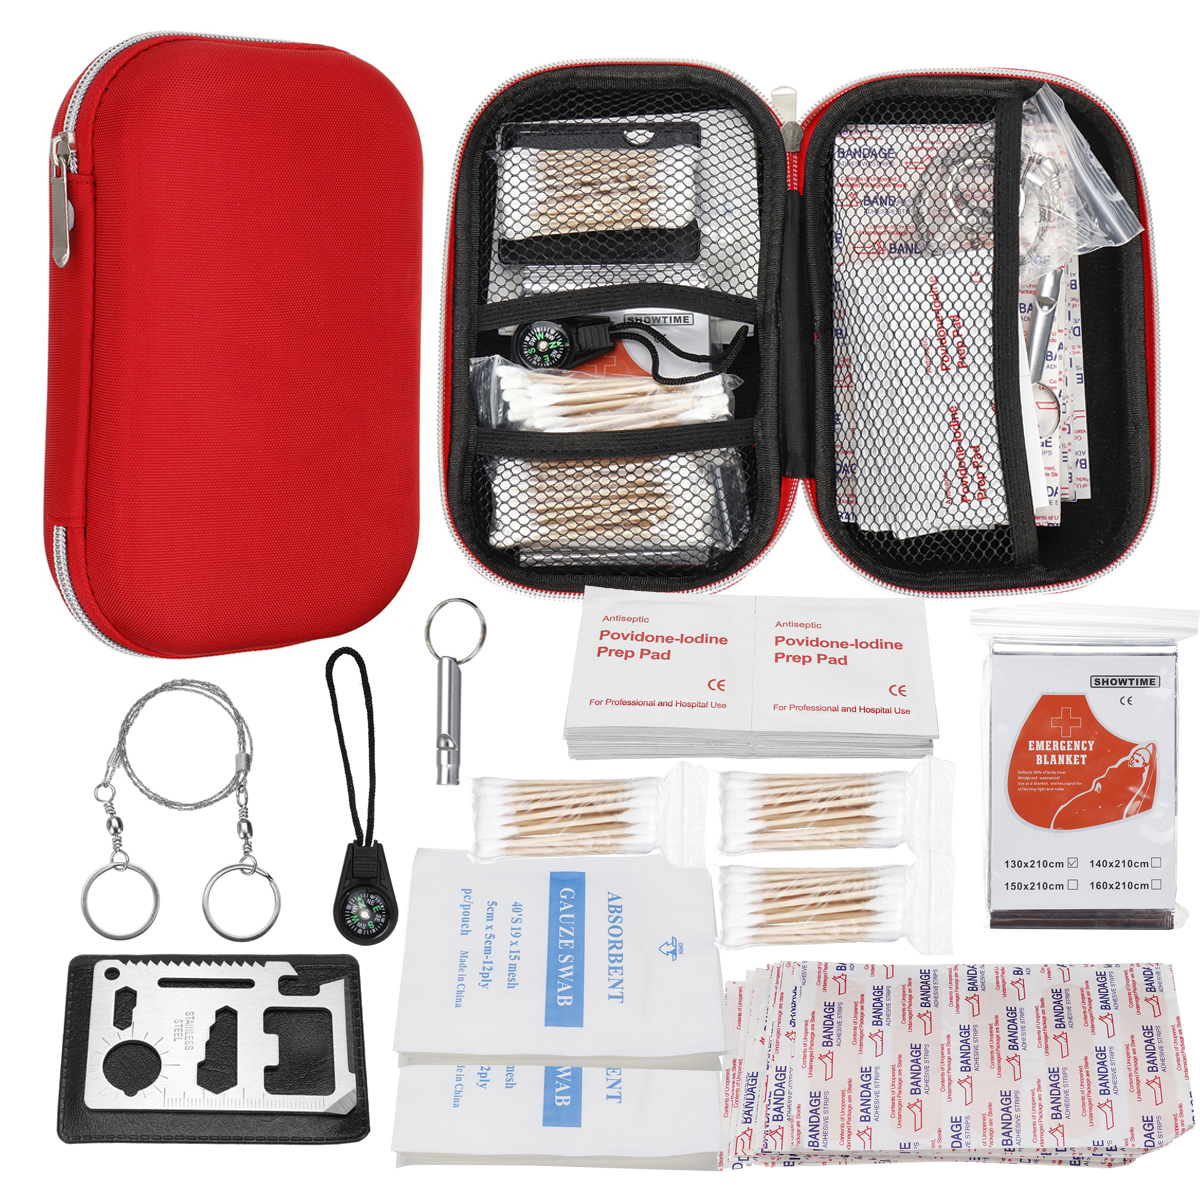 

261PC Emergency Survival Equipment First Aid Kit Outdoor Gear Tool Tactical Camping Hiking